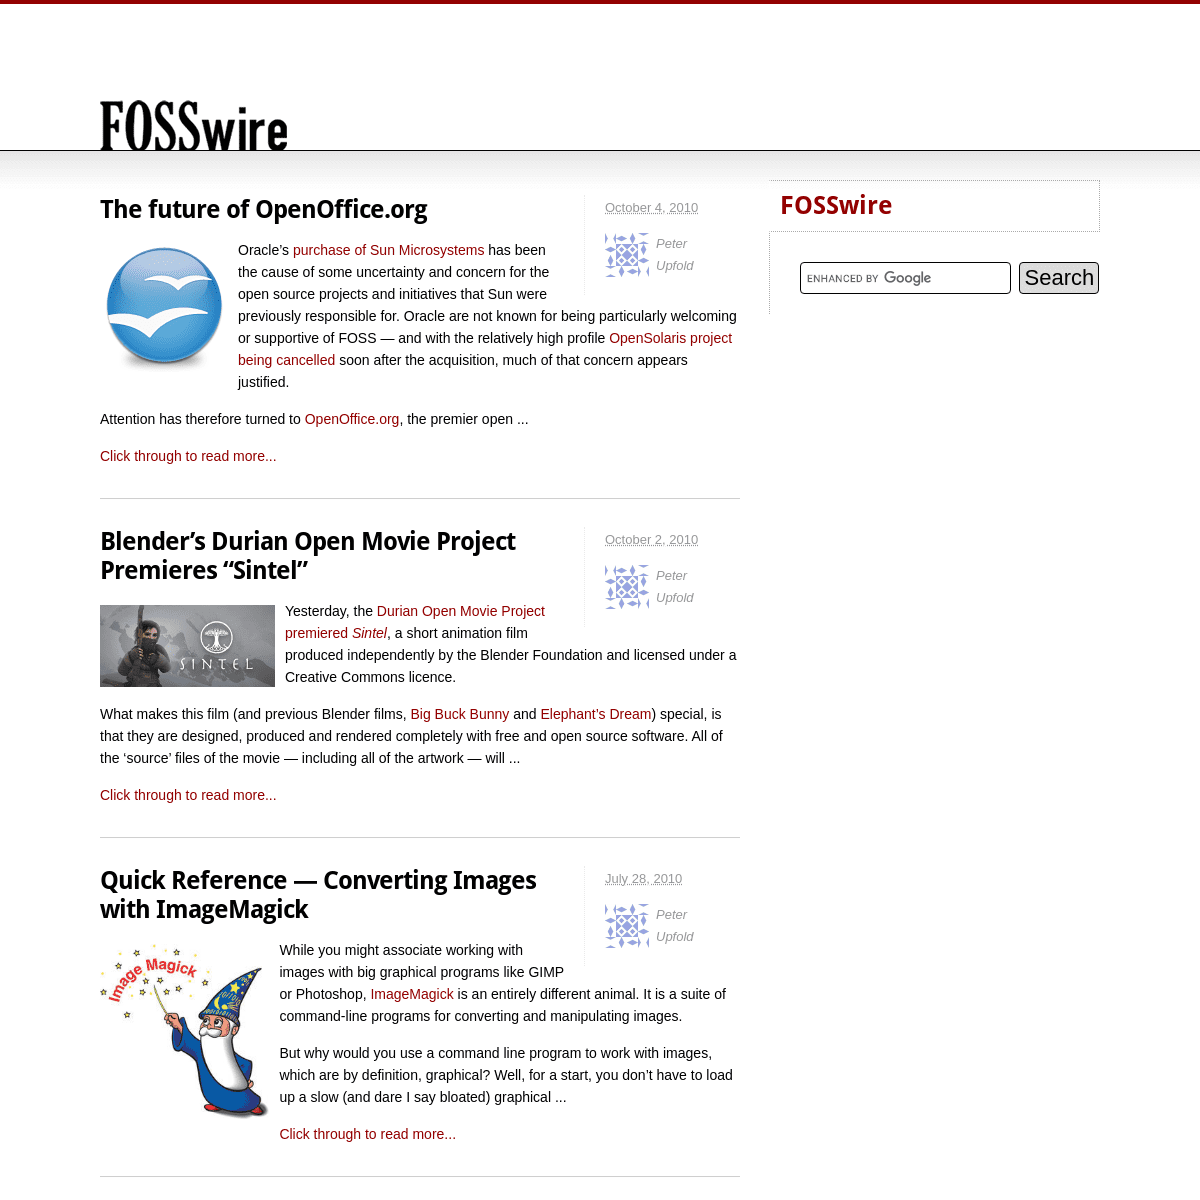 A complete backup of https://fosswire.com